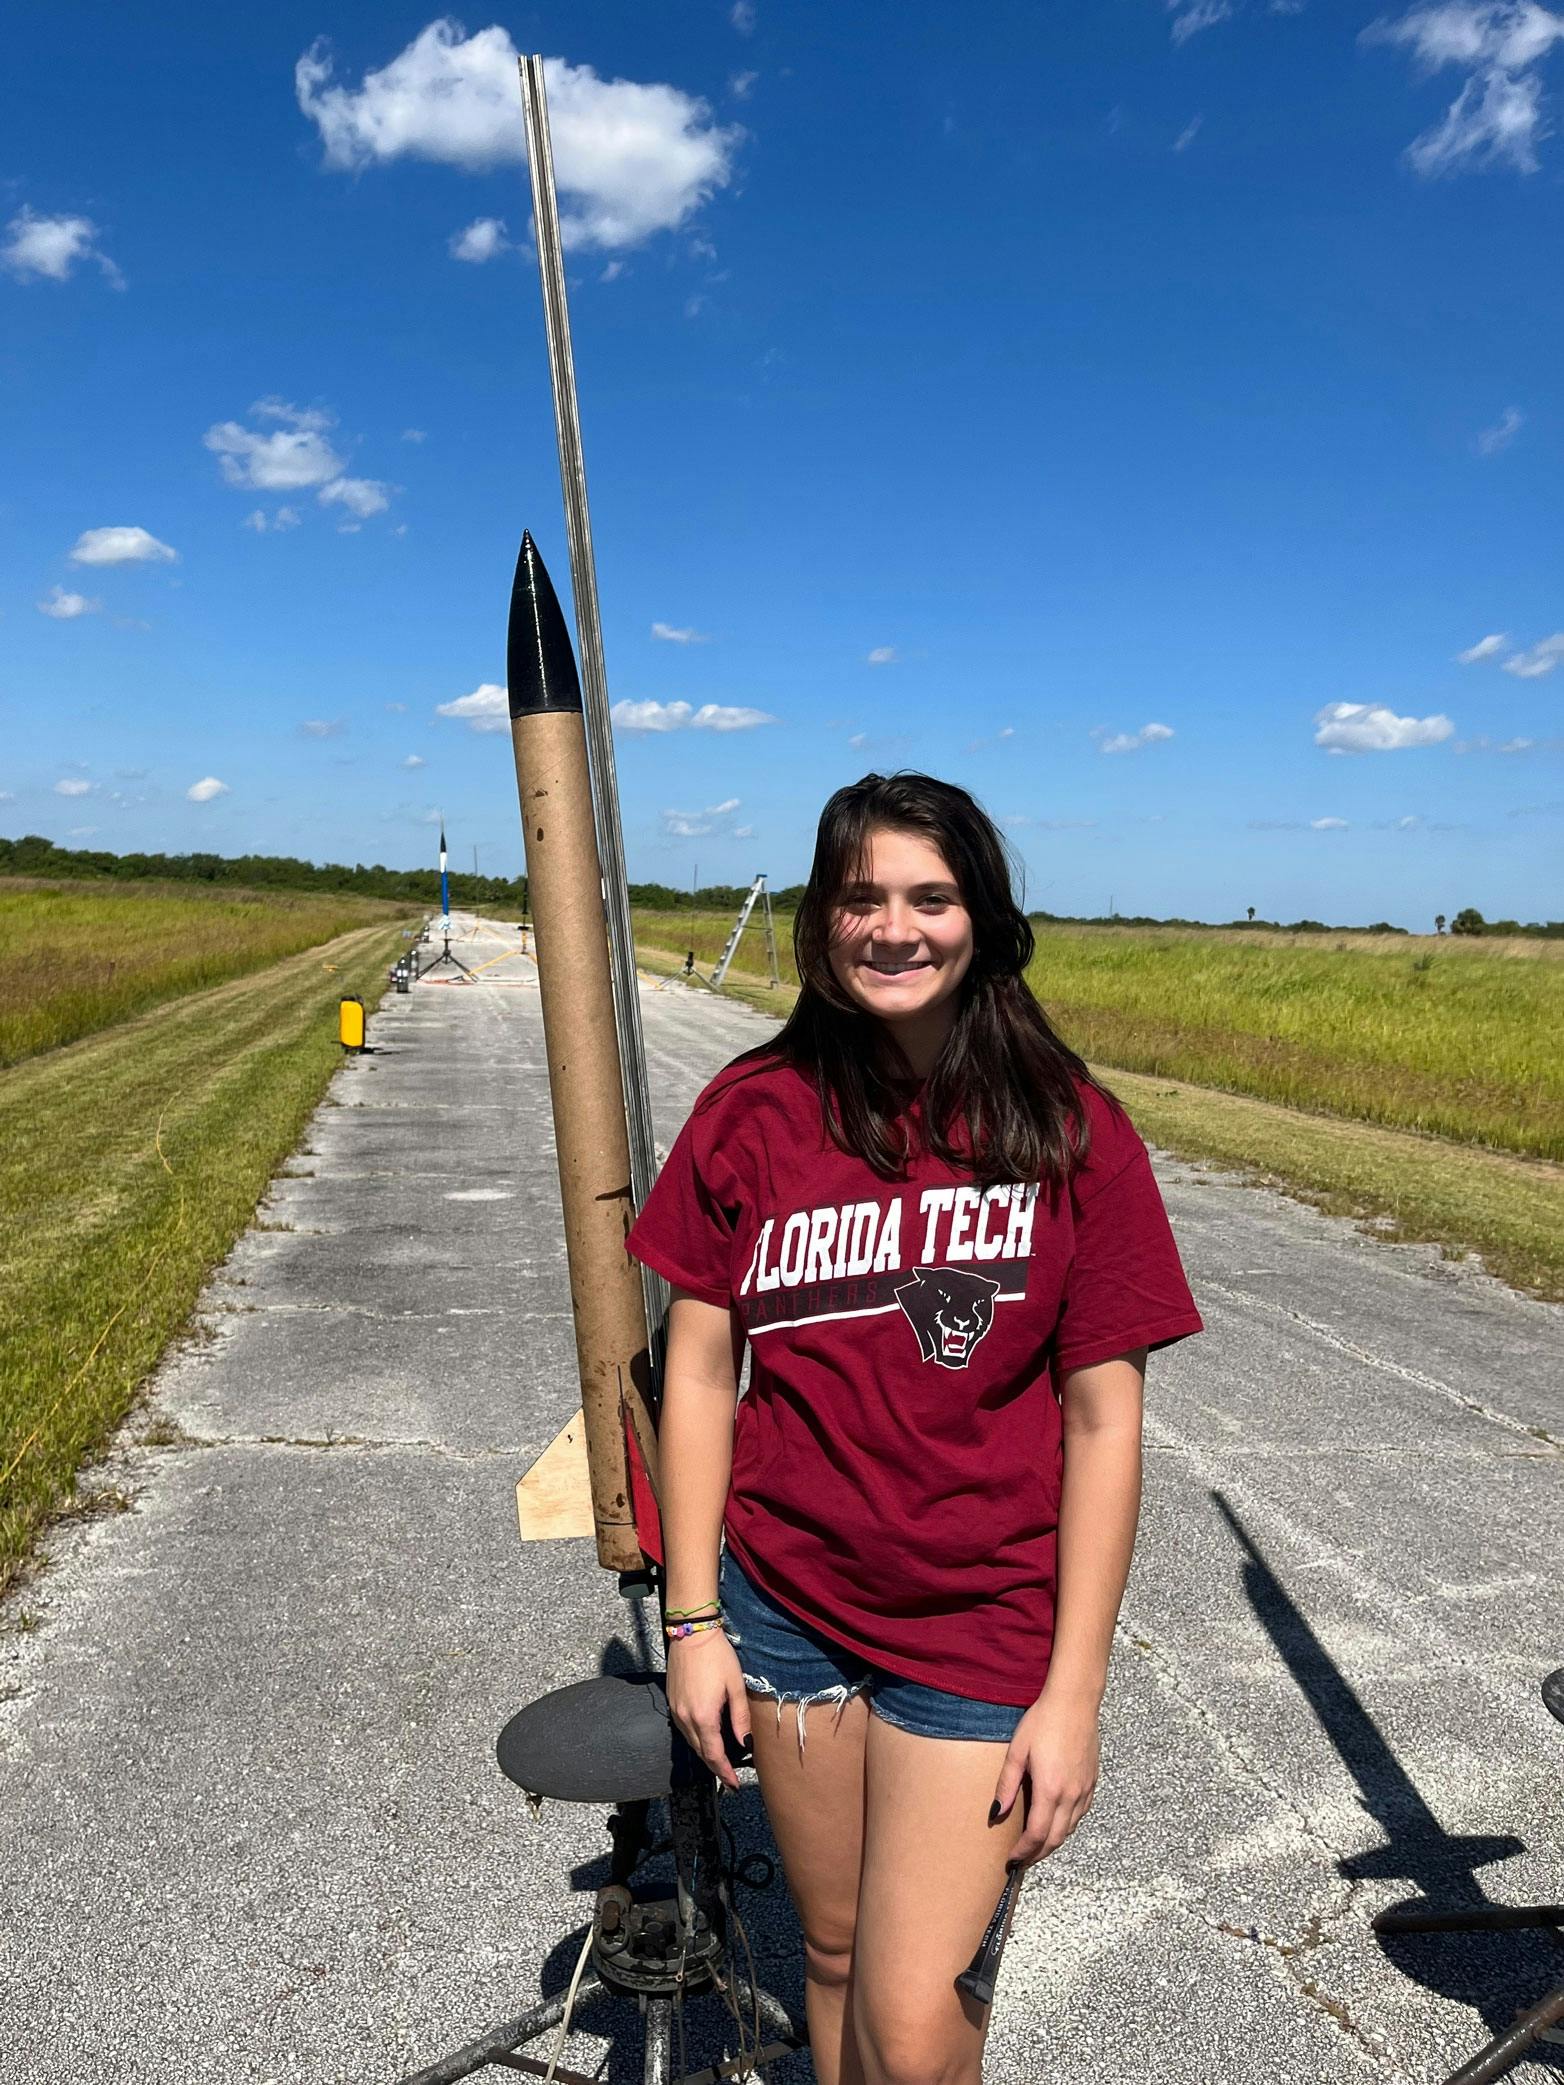 Karissa is standing in front of her rocket. She is wearing a Florida Tech T-shirt.